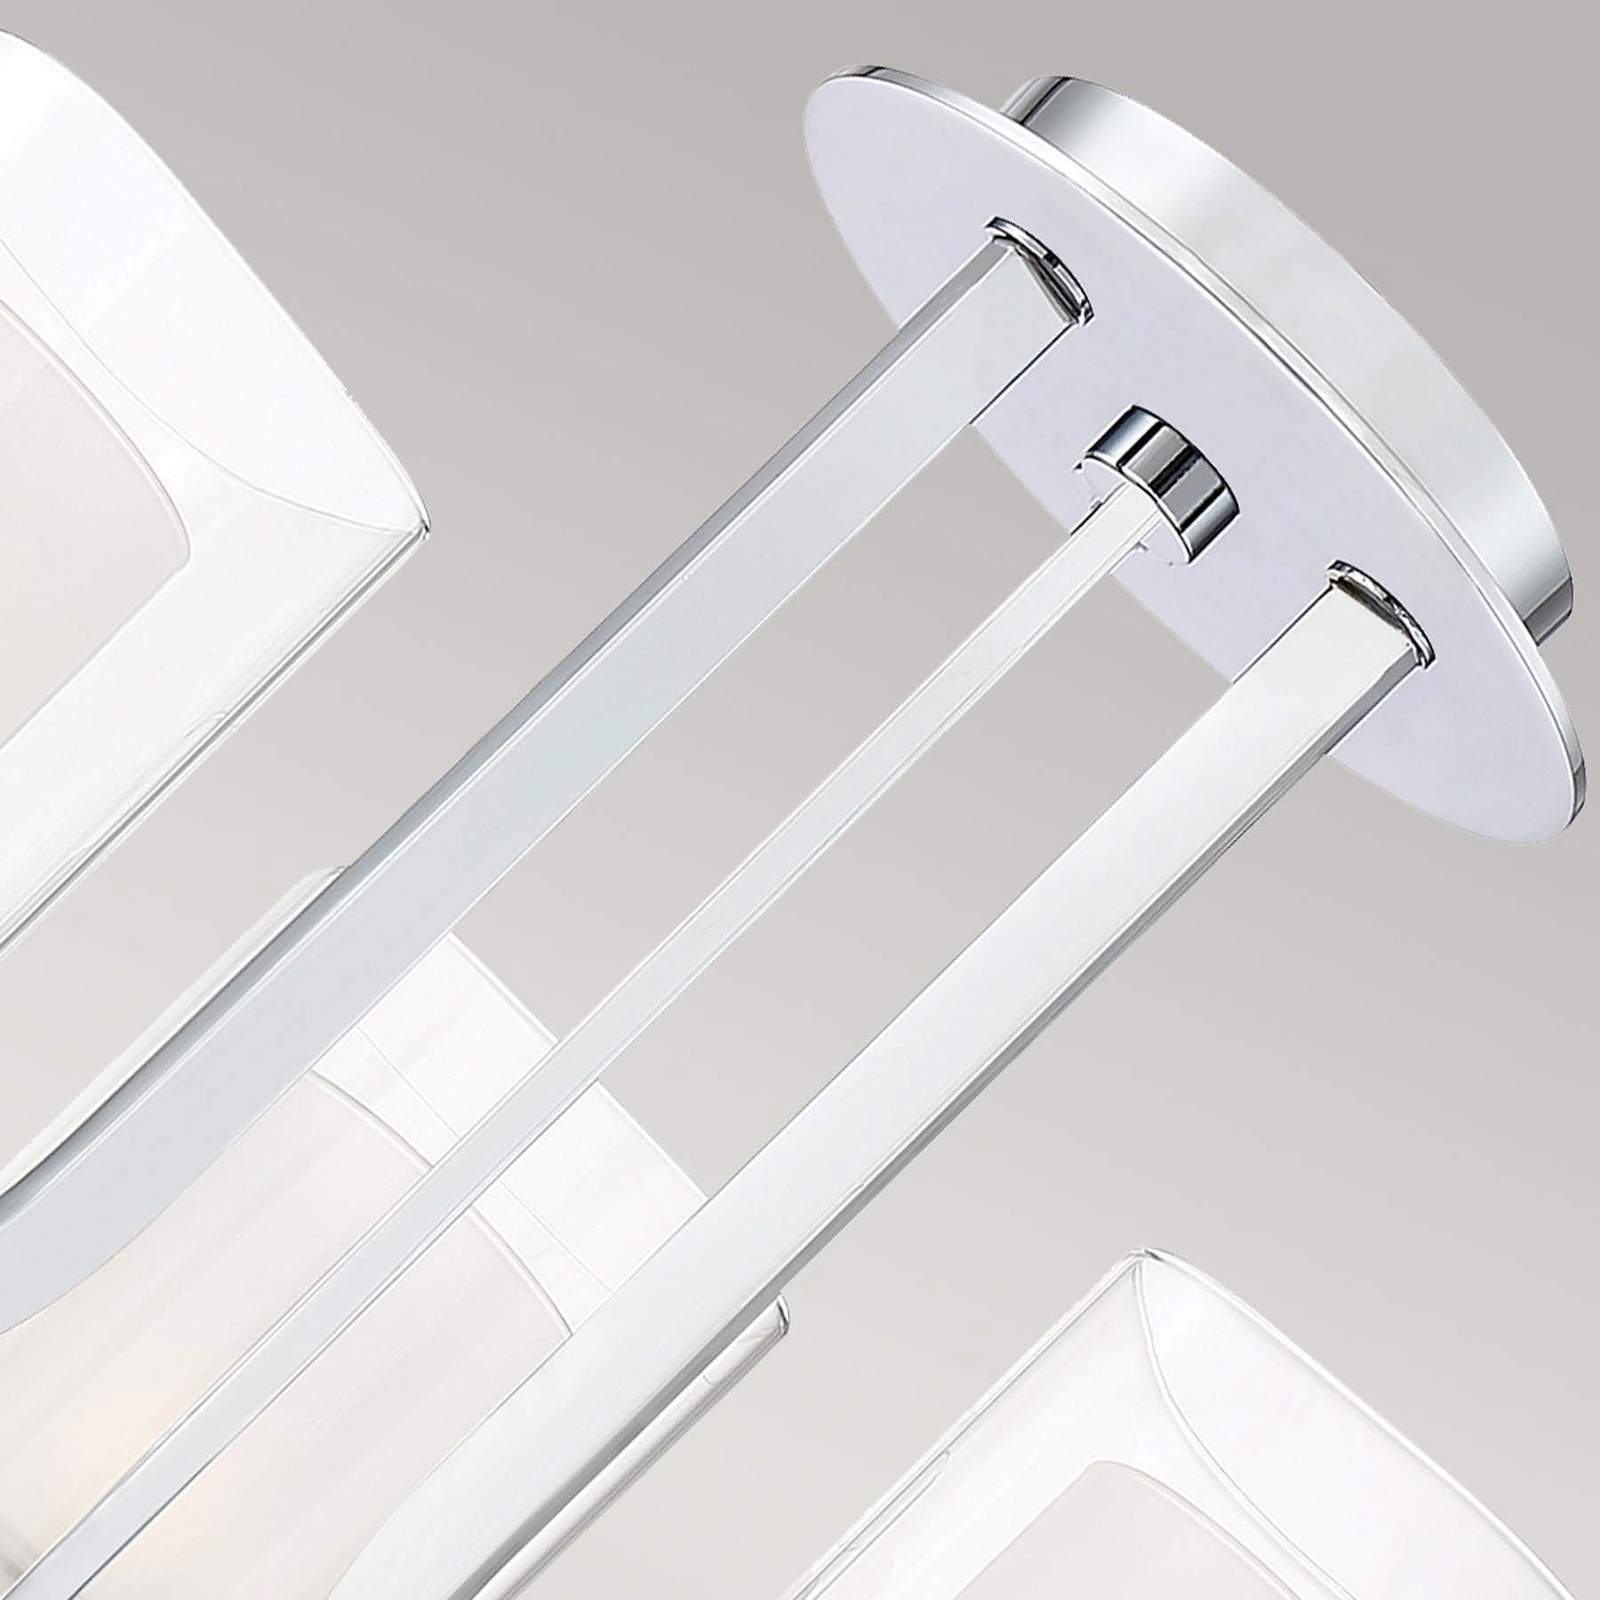 Kolt IP44 ceiling light with double glass shades